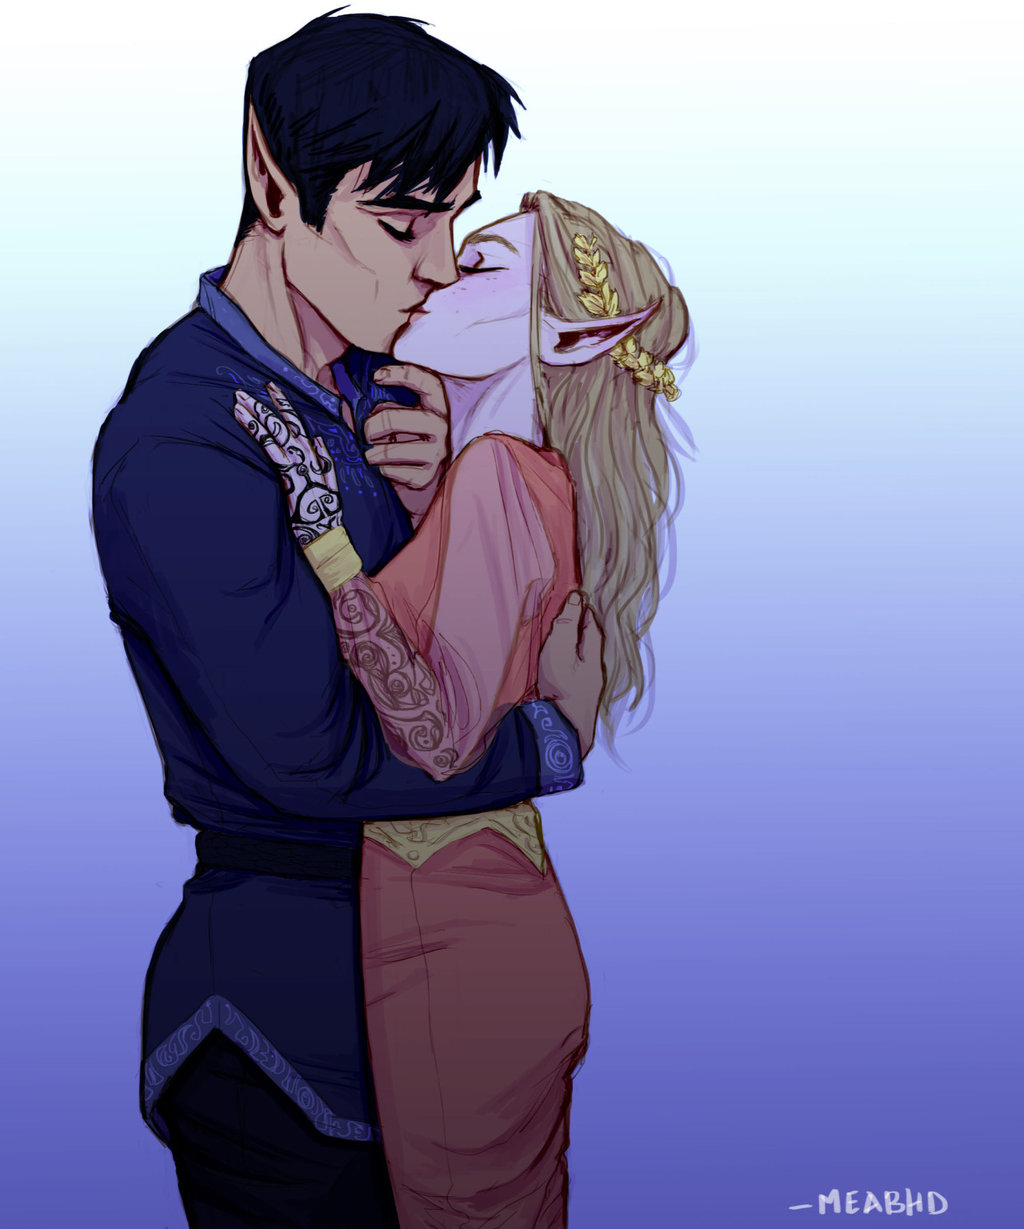 Rhysand and Feyre by meabhdeloughry.